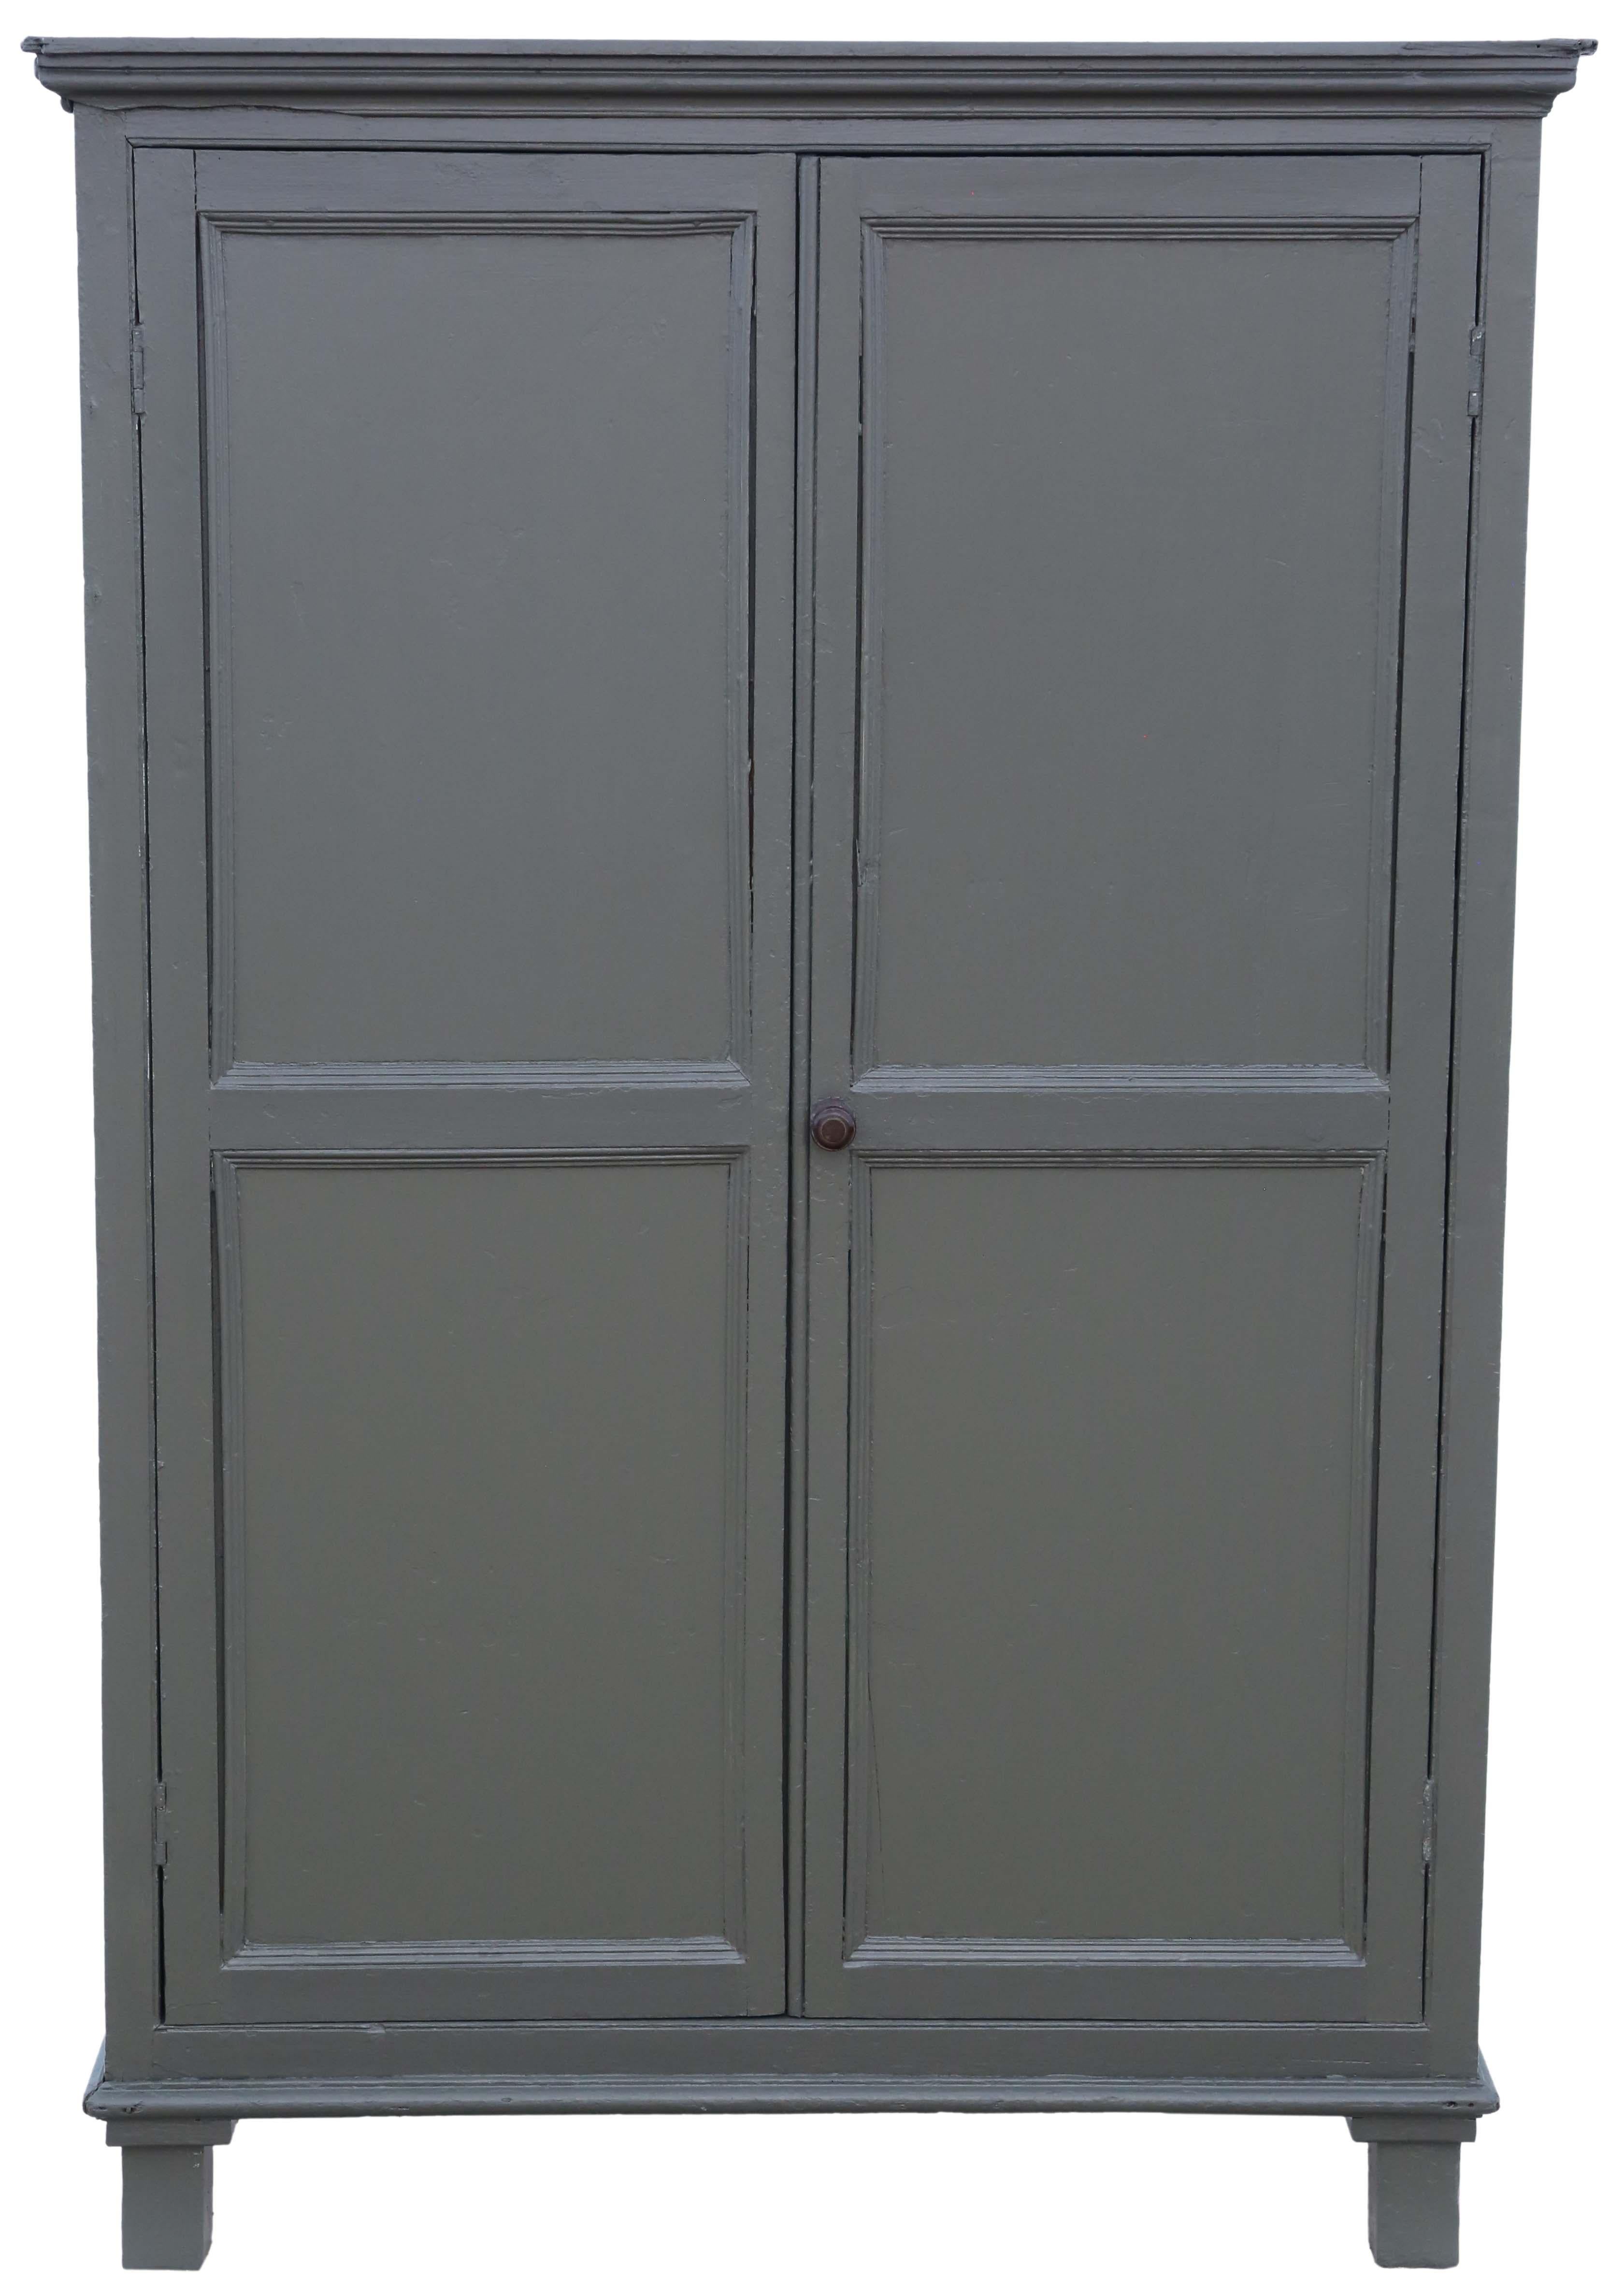 Antique quality 19th Century painted housekeeper's larder cupboard. Sometimes known as an estate cupboard. A wonderful period piece.

Repainted in Little Green Pompeian Ash (outside) and F&B Clunch (inside).

Solid and strong, with no loose joints.